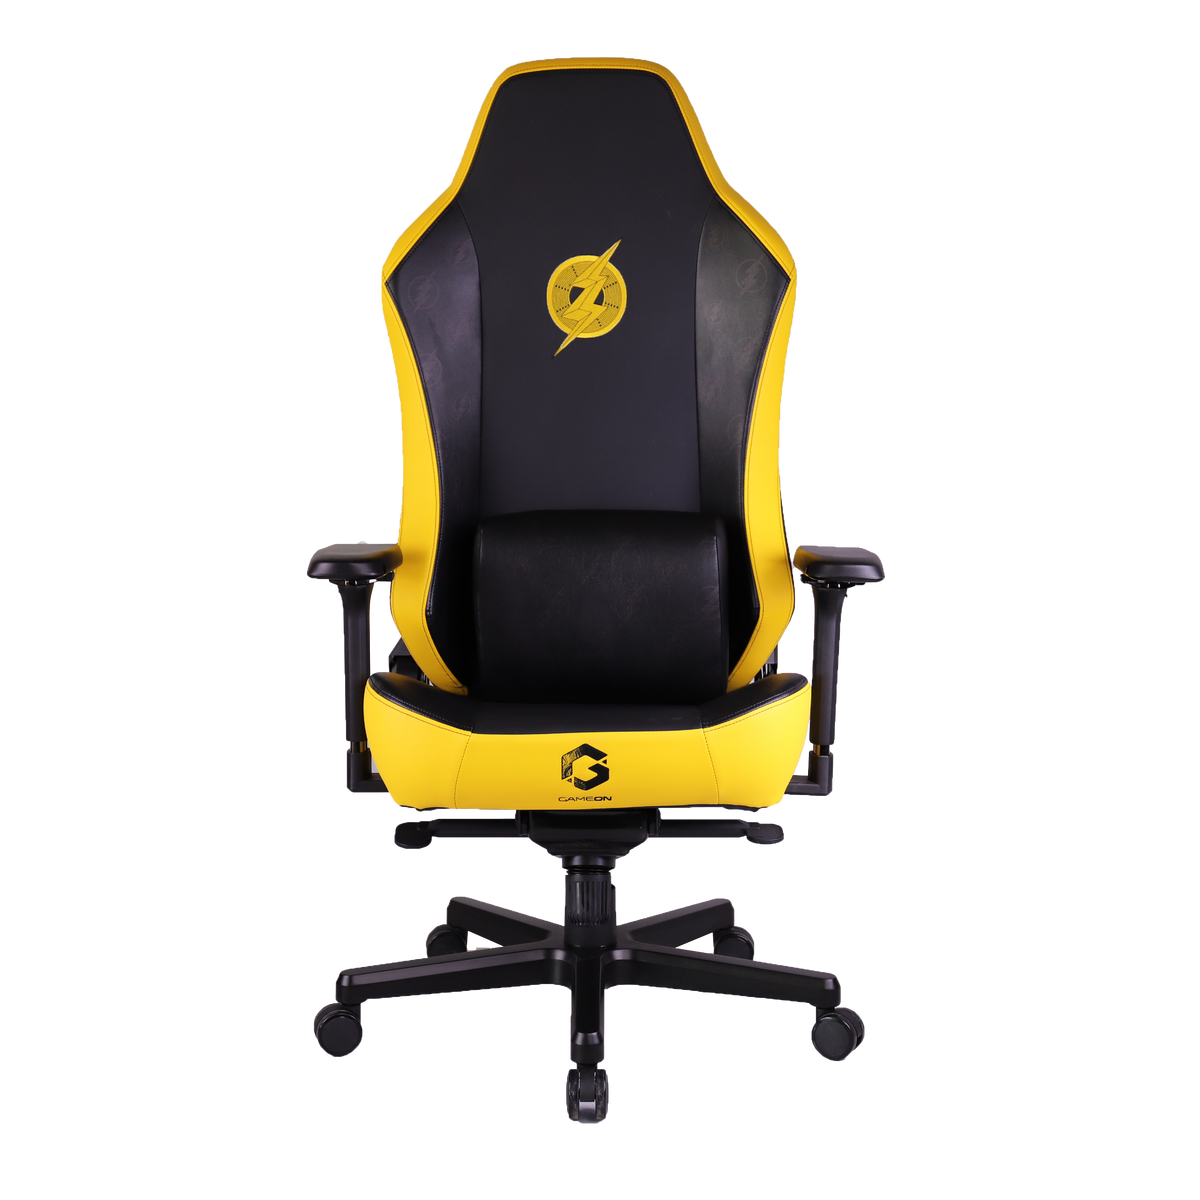 GAMEON x DC Licensed Gaming Chair With Adjustable 4D Armrest & Metal Base - Flash